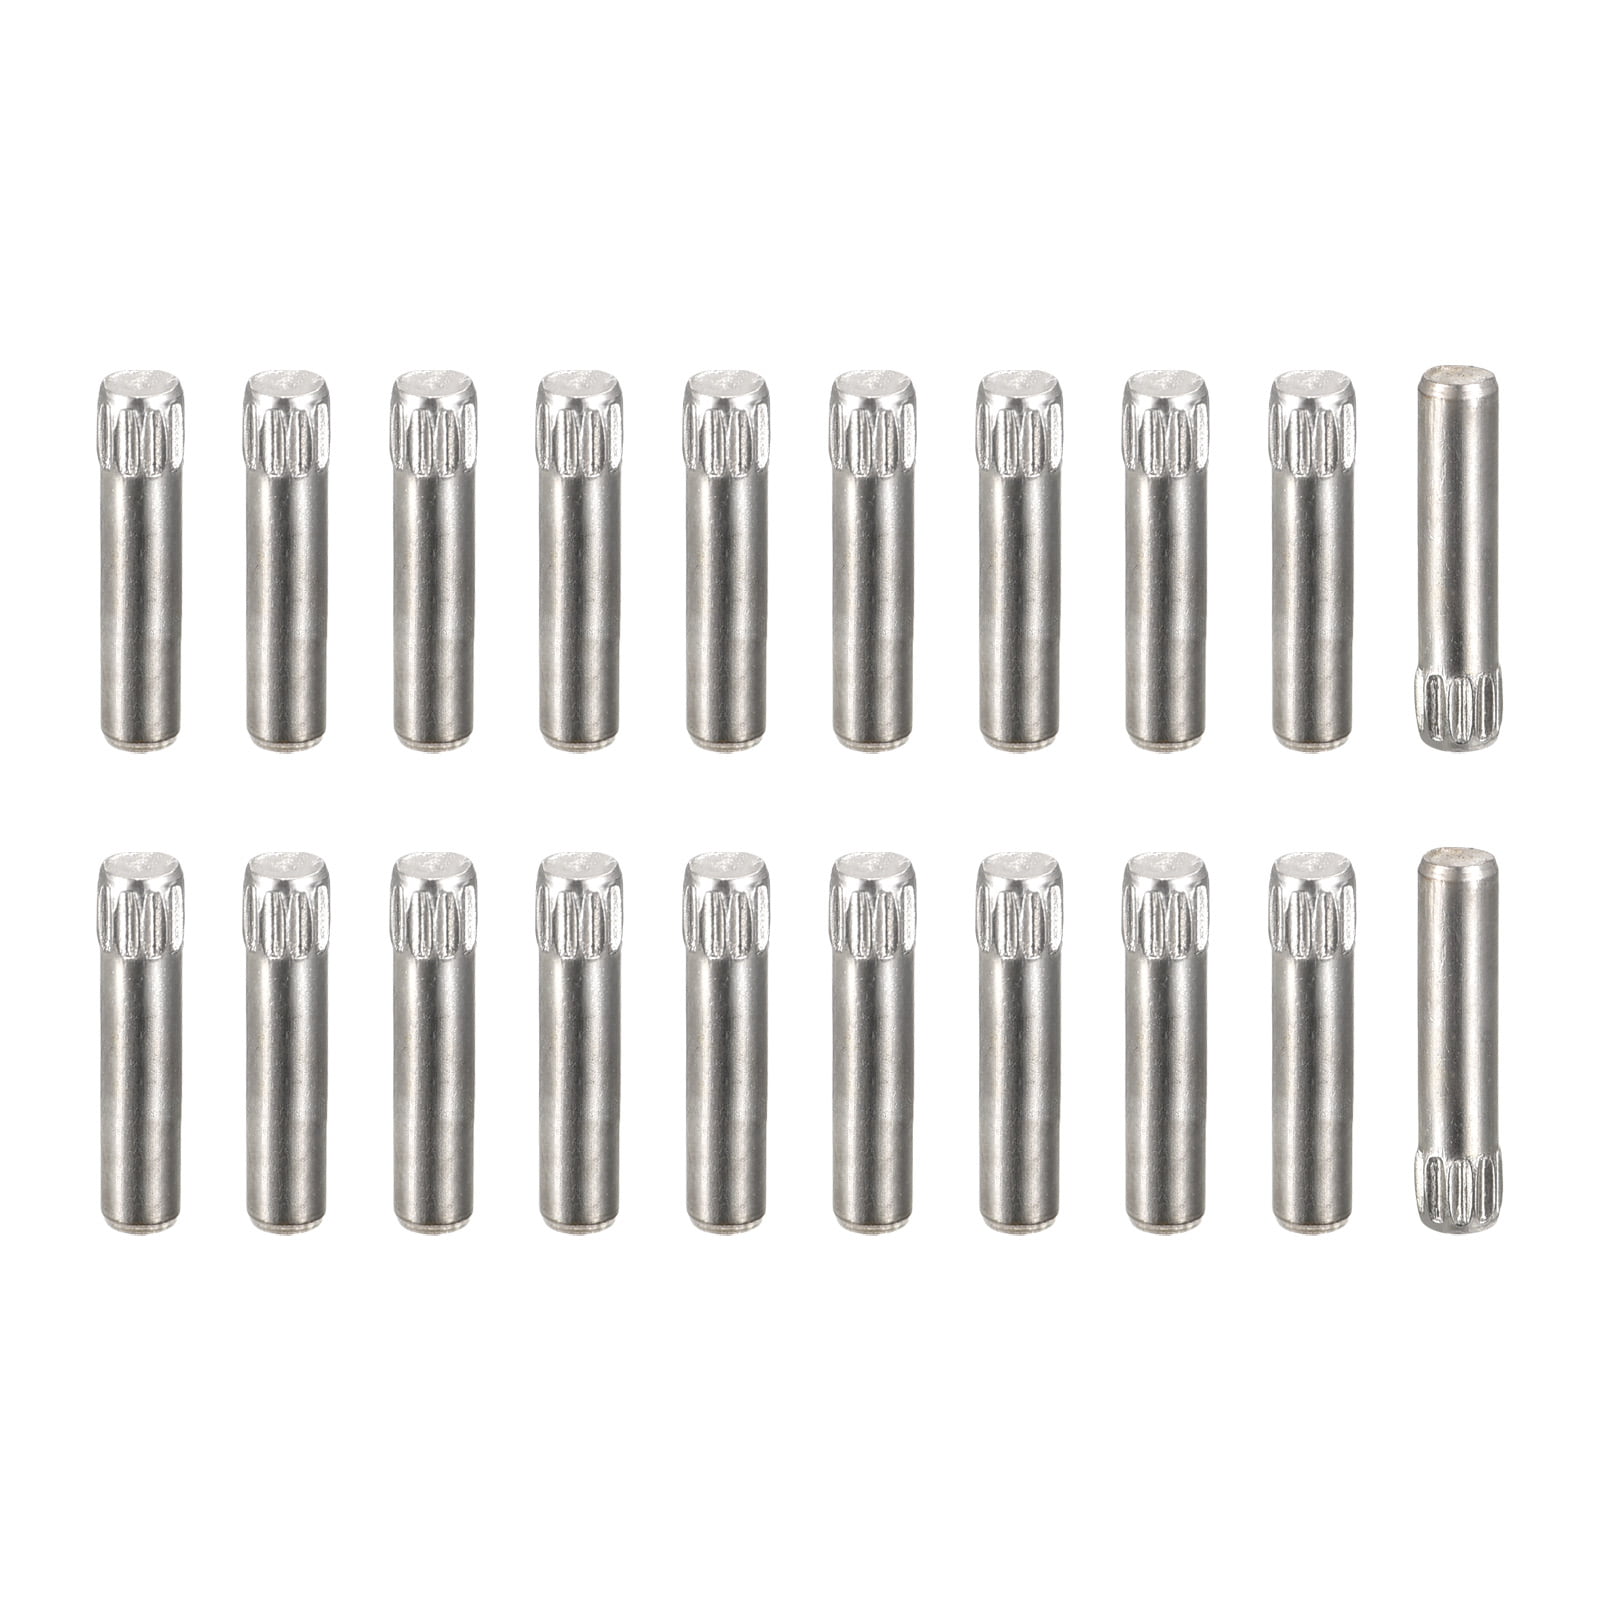 3x16mm 304 Stainless Steel Dowel Pins, 20 Pack Knurled Head Flat End Dowel  Pin